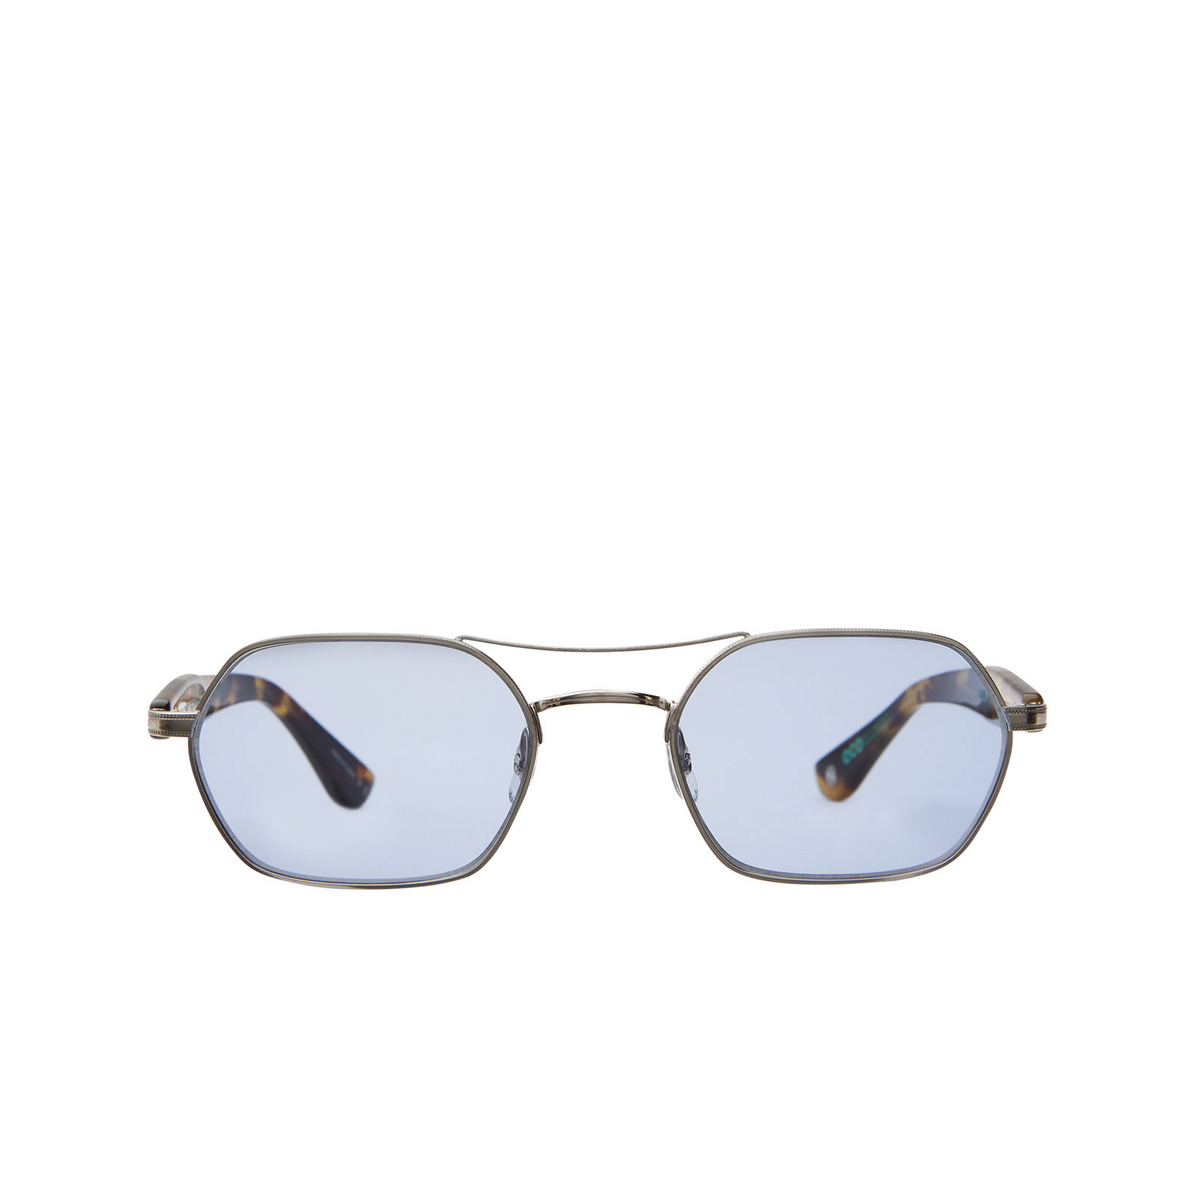 Garrett Leight GOLDIE Sunglasses BS-BIO-SPT/PAC Brushed Silver - Bio Spotted Tortoise - front view